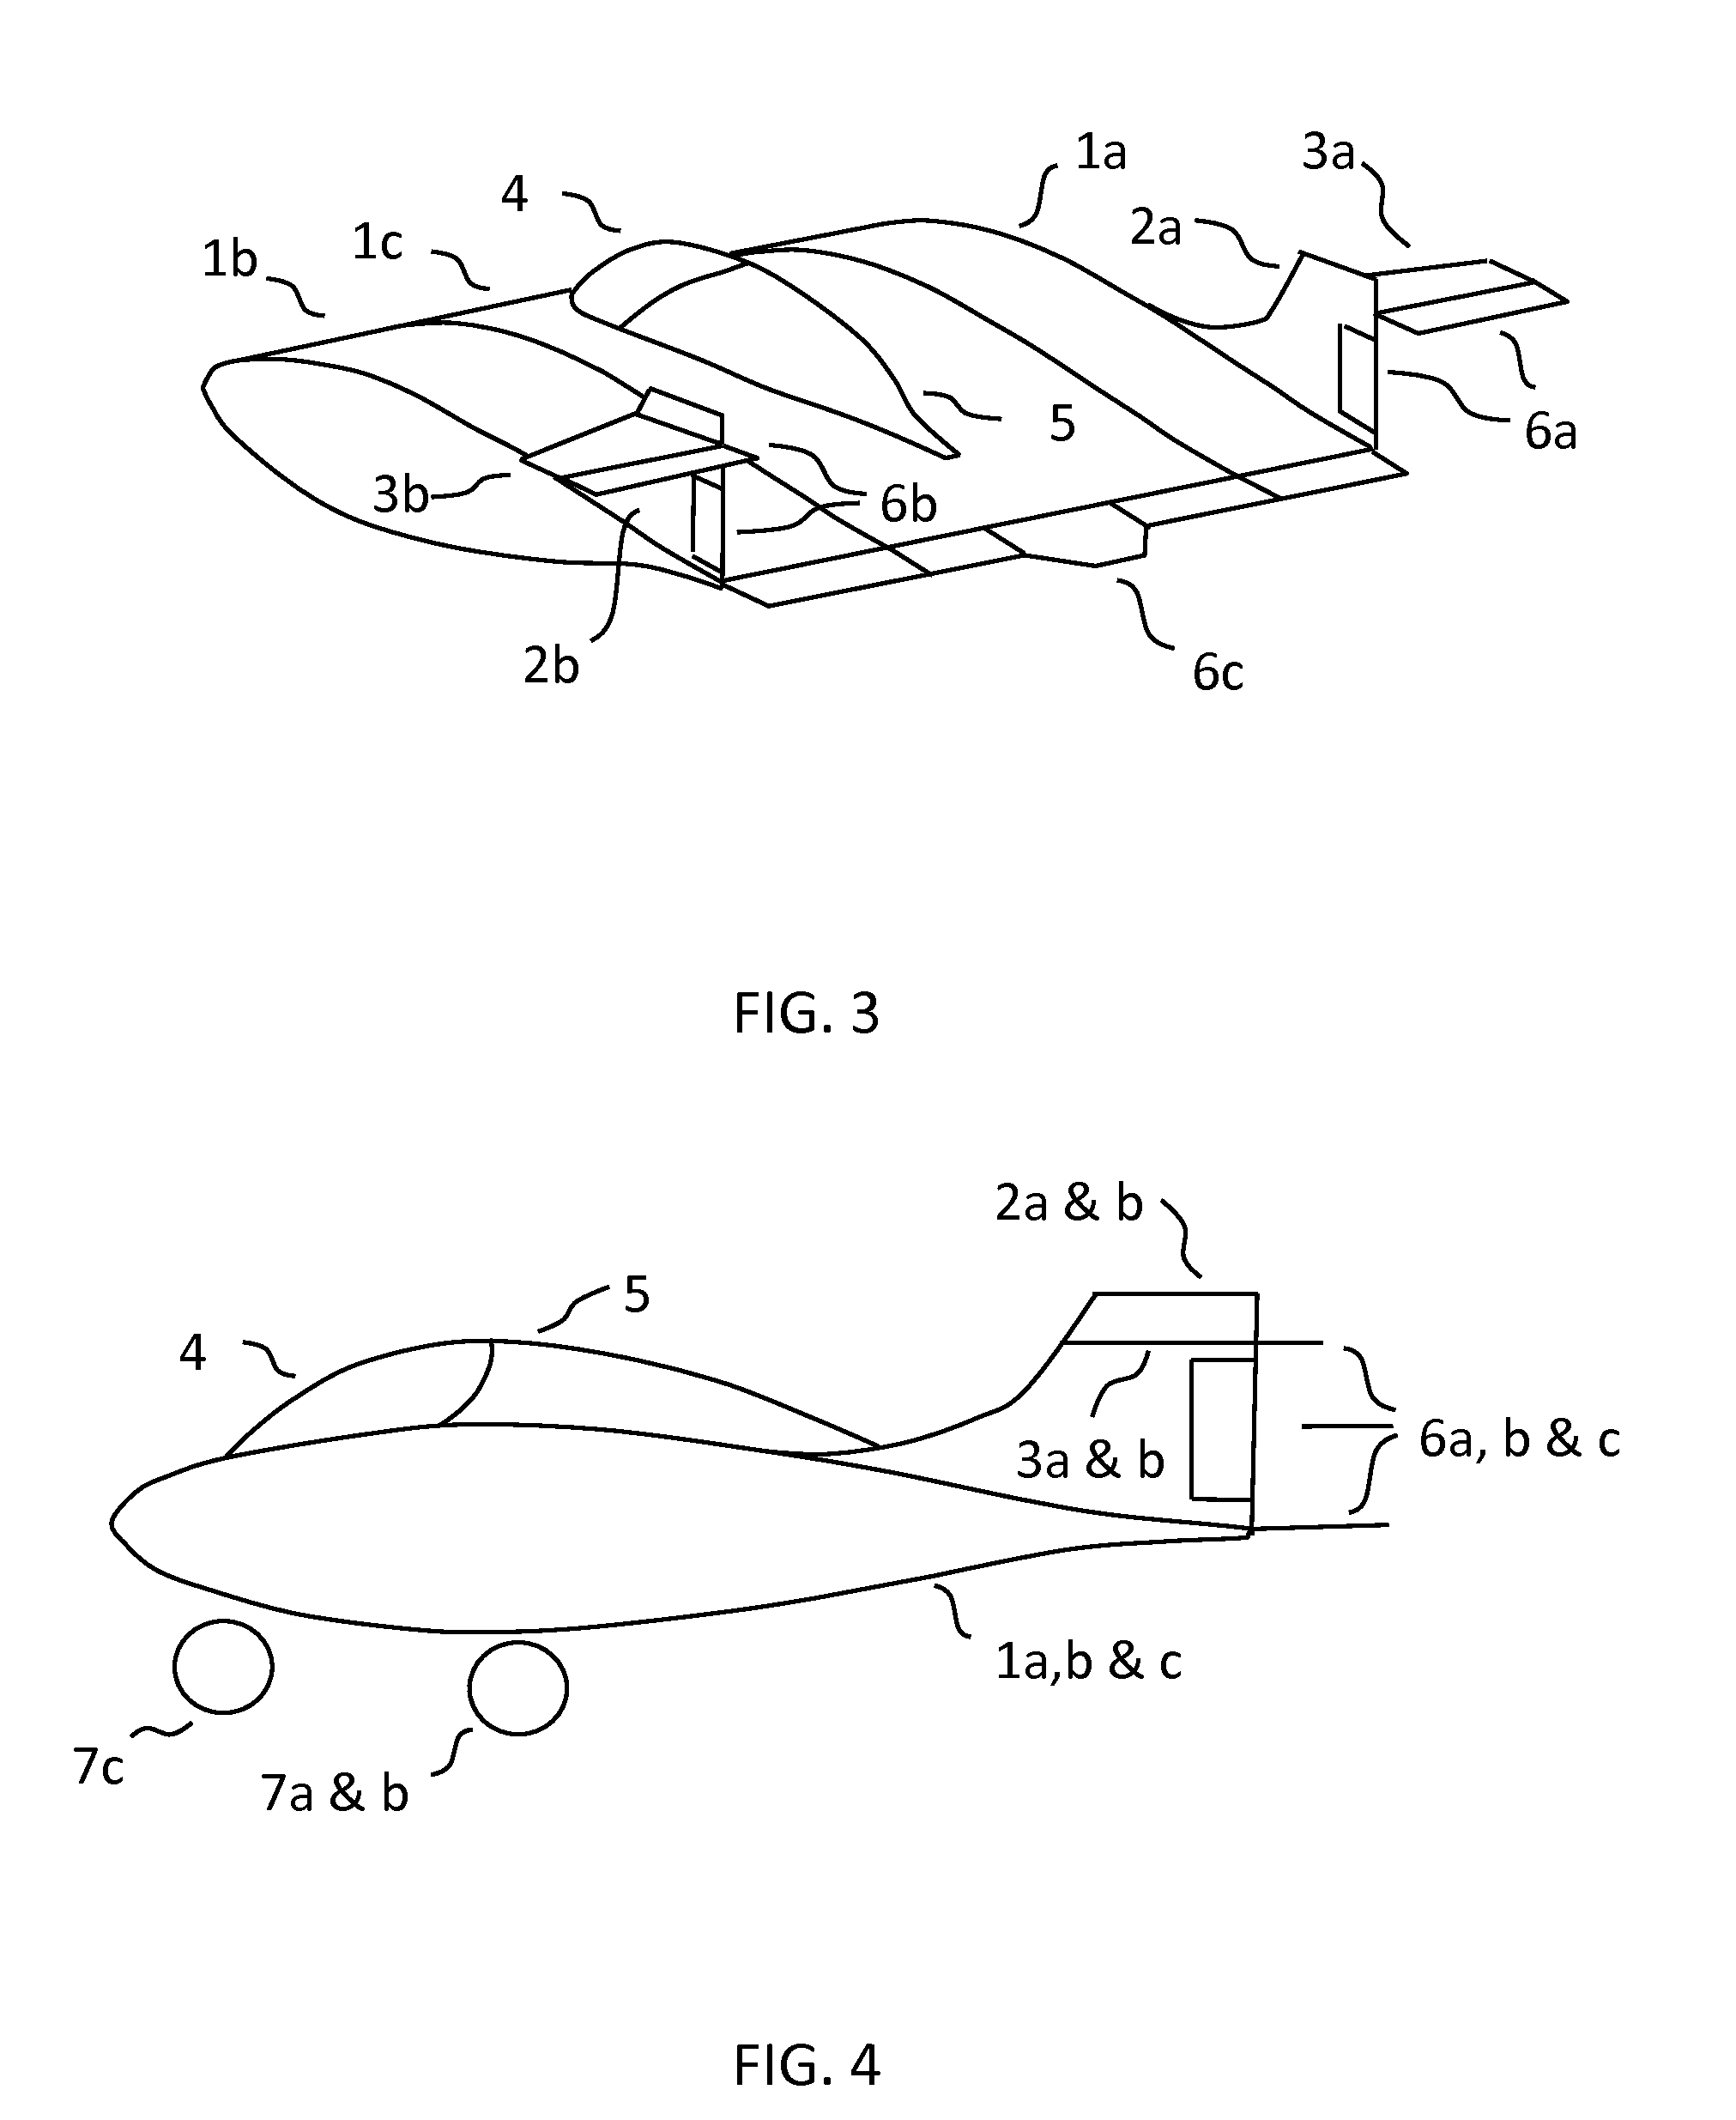 Stable Low Aspect Ratio Flying Wing